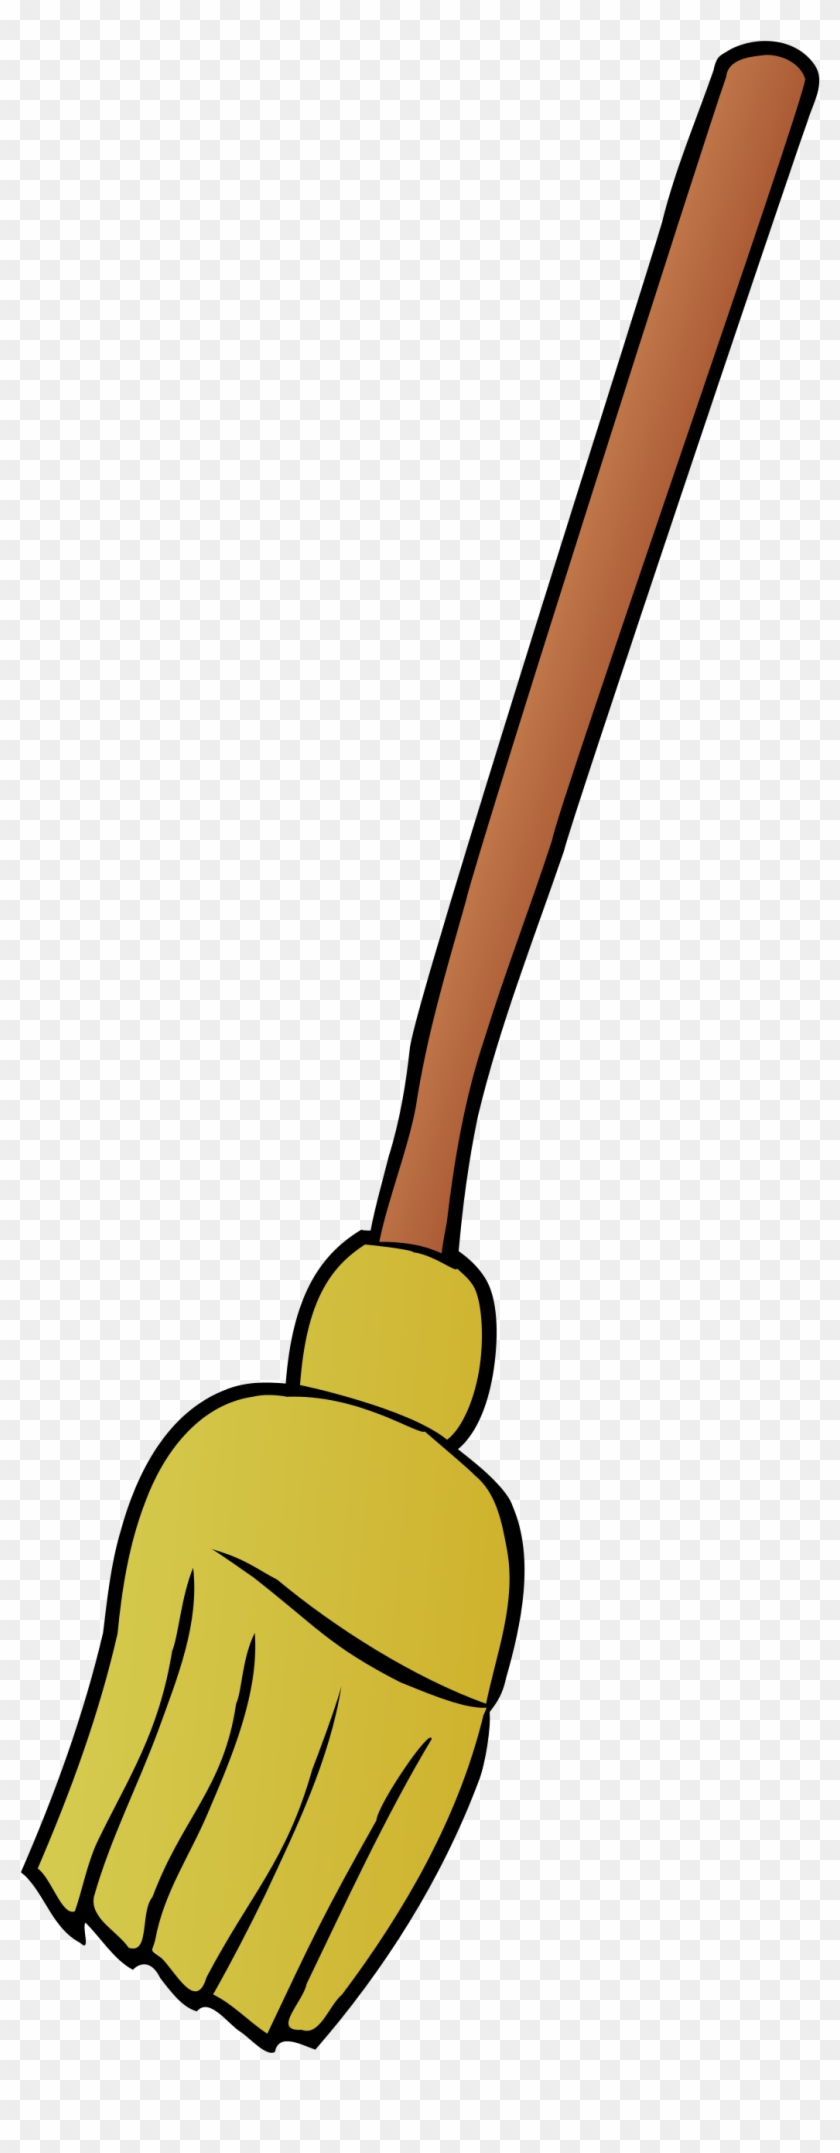 Open - Broom .svg Clipart (#287296) - PikPng